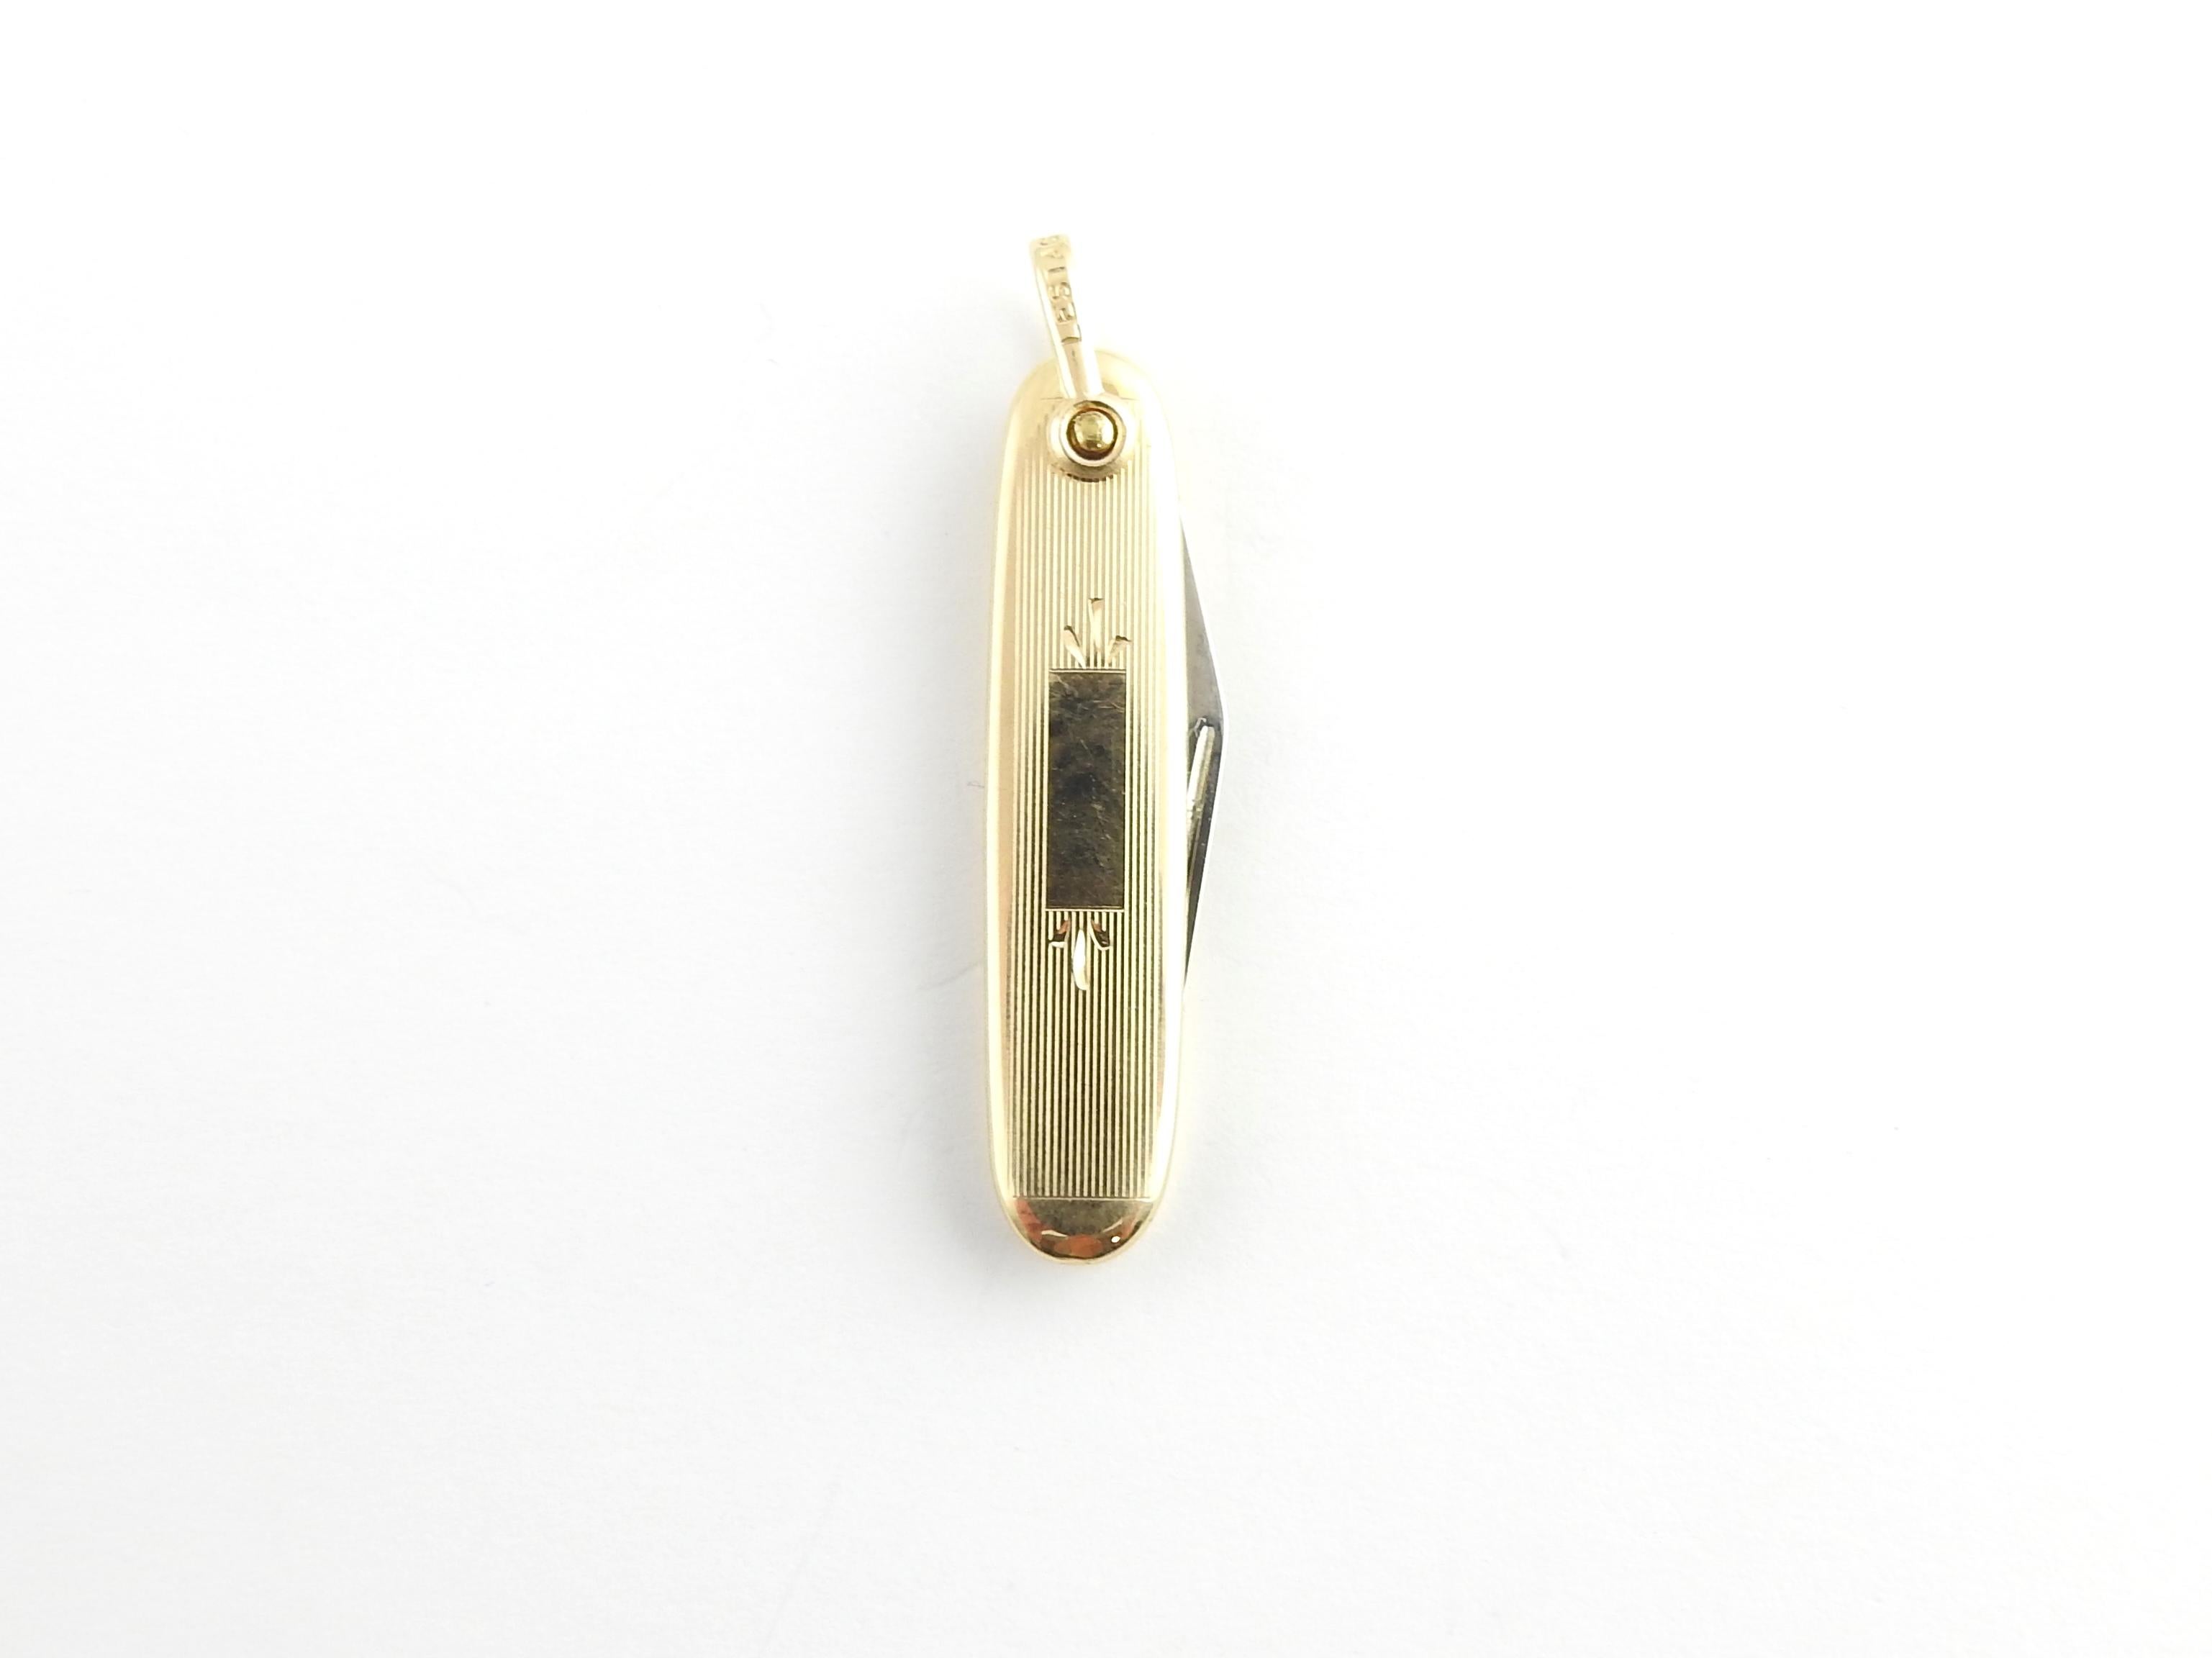 Vintage 14 Karat Yellow Gold and Stainless Steel Pocket Knife

This elegant pocket knife features a stainless steel blade house in a textured 14K yellow gold case with a polished bar on which a monogram can be engraved.

Size: 39 mm x 9 mm

Weight: